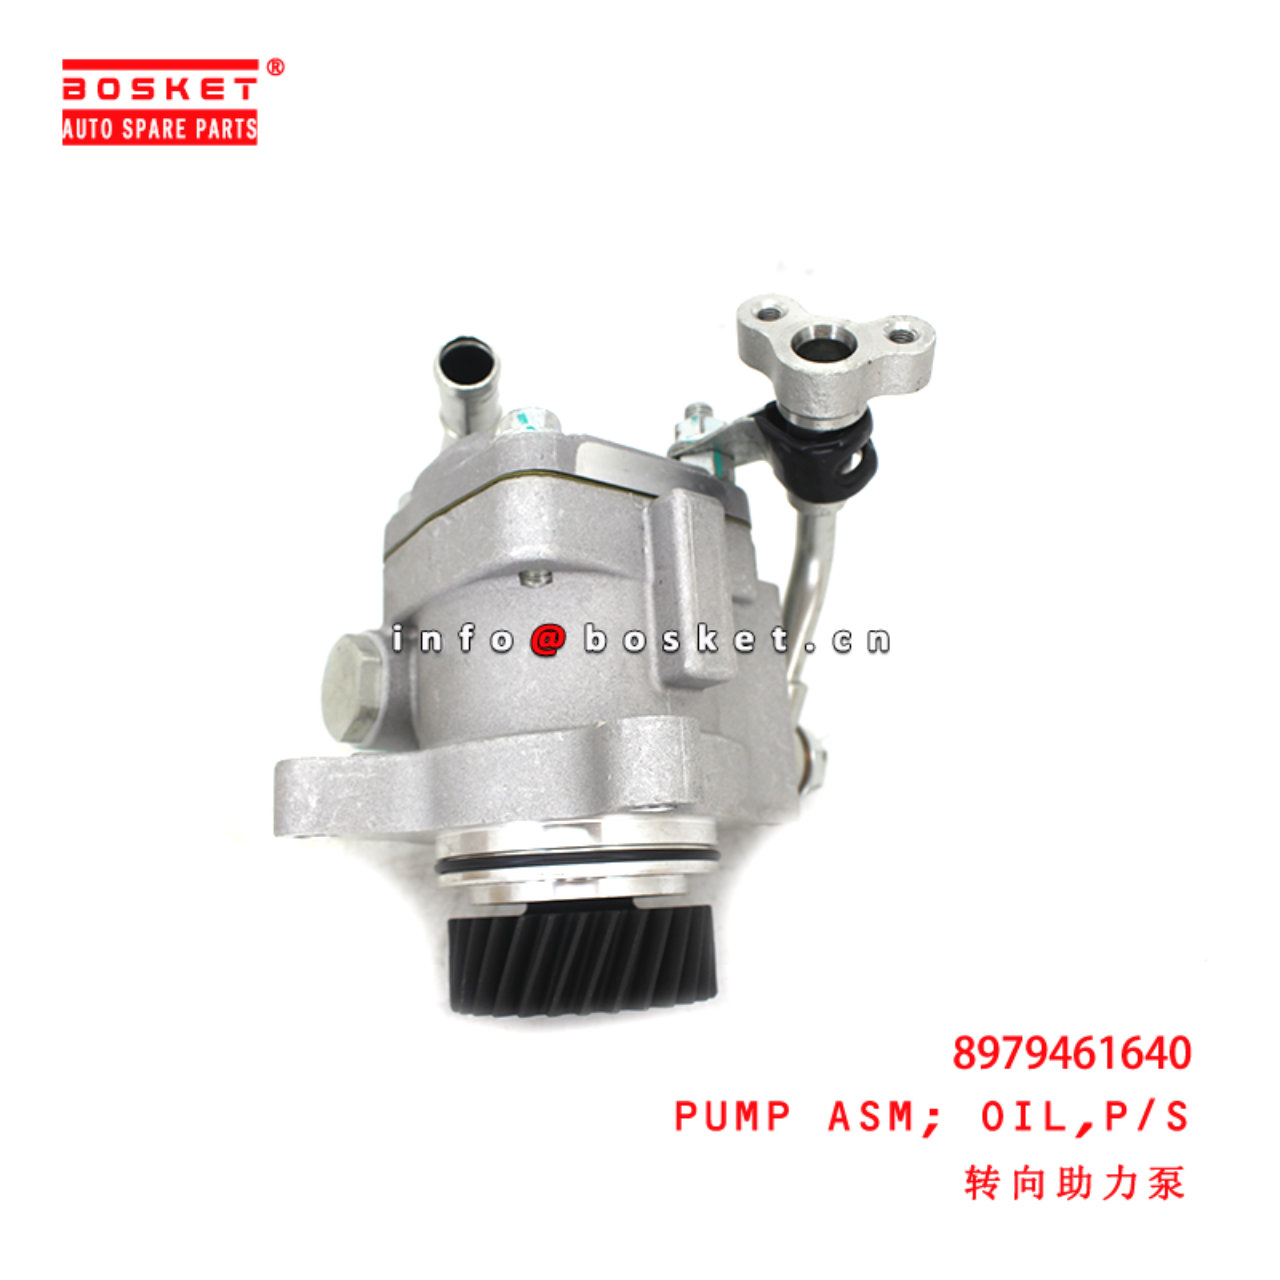 8-97946164-0 Power Steering Oil Pump Assembly suitable for ISUZU DMAX 4JK1 8979461640